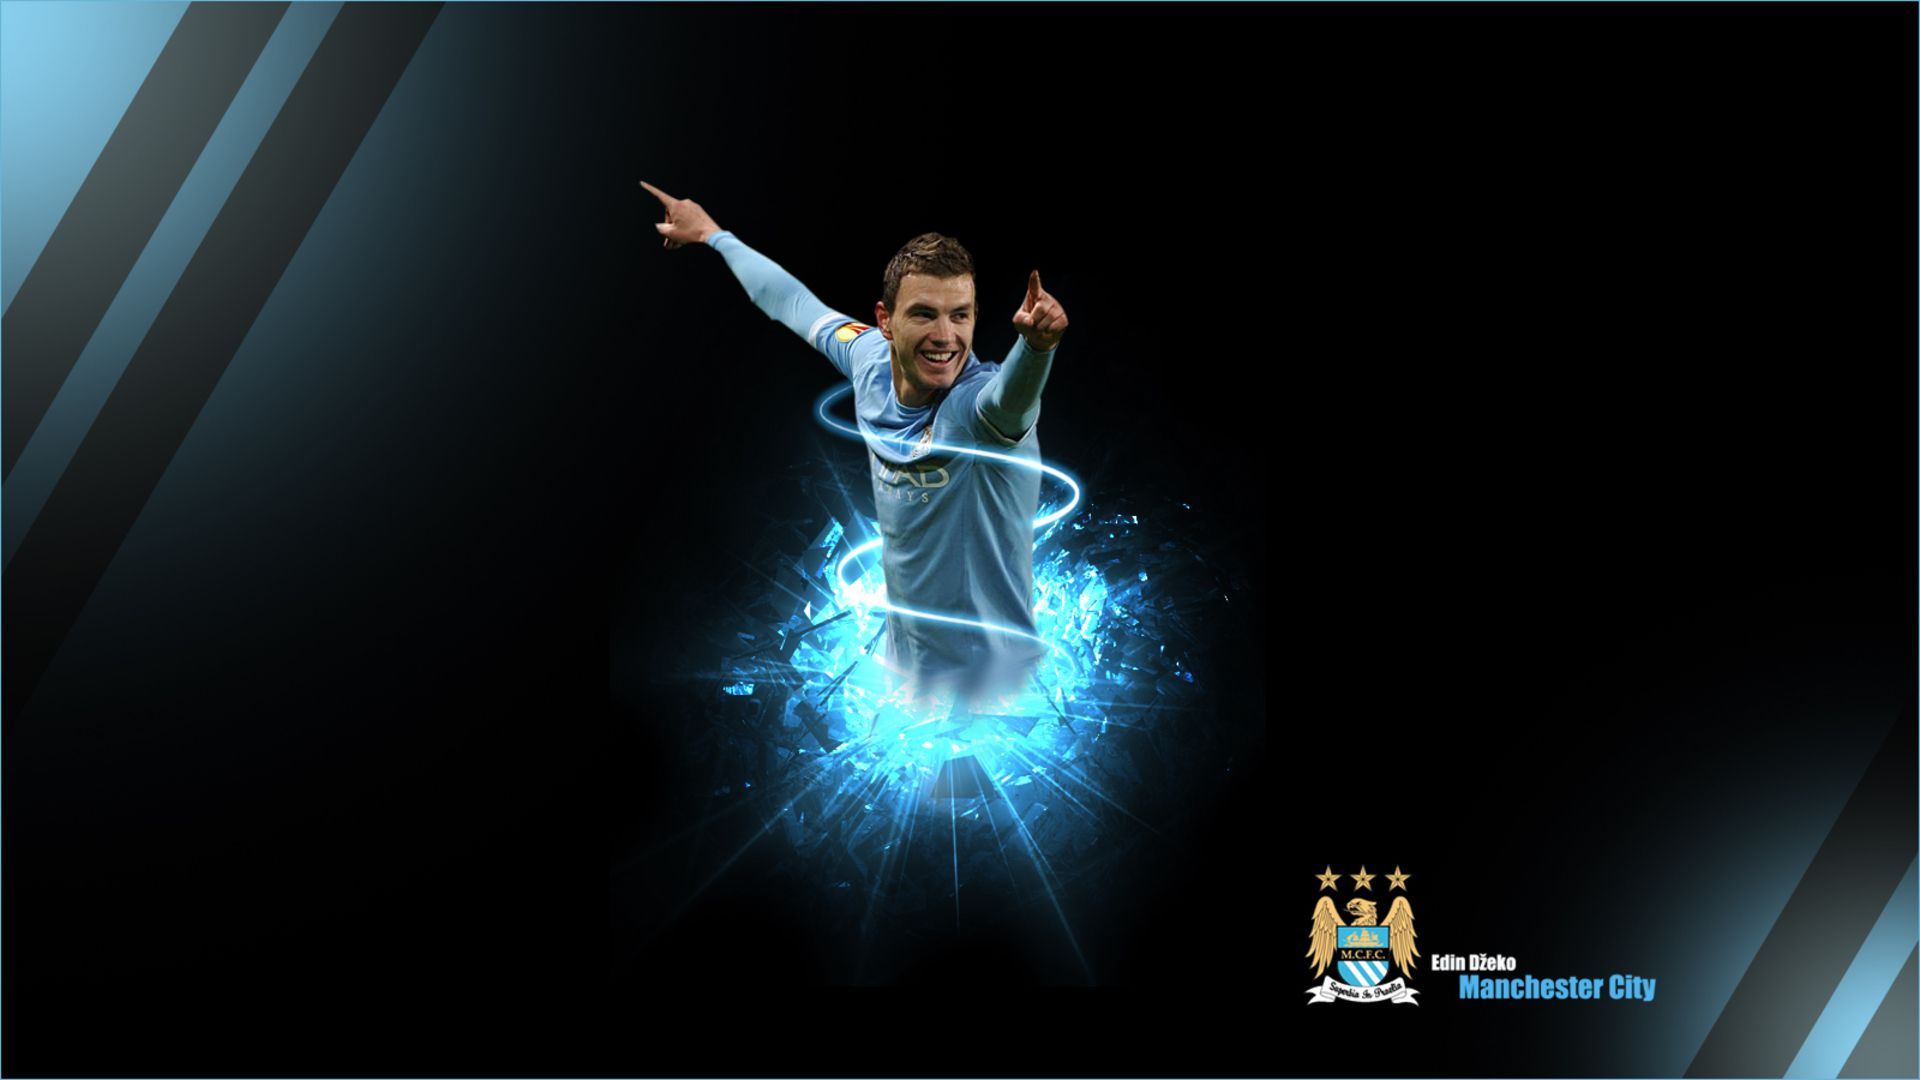 1920x1080 Free Download Football Player Of Manchester City Wallpaper